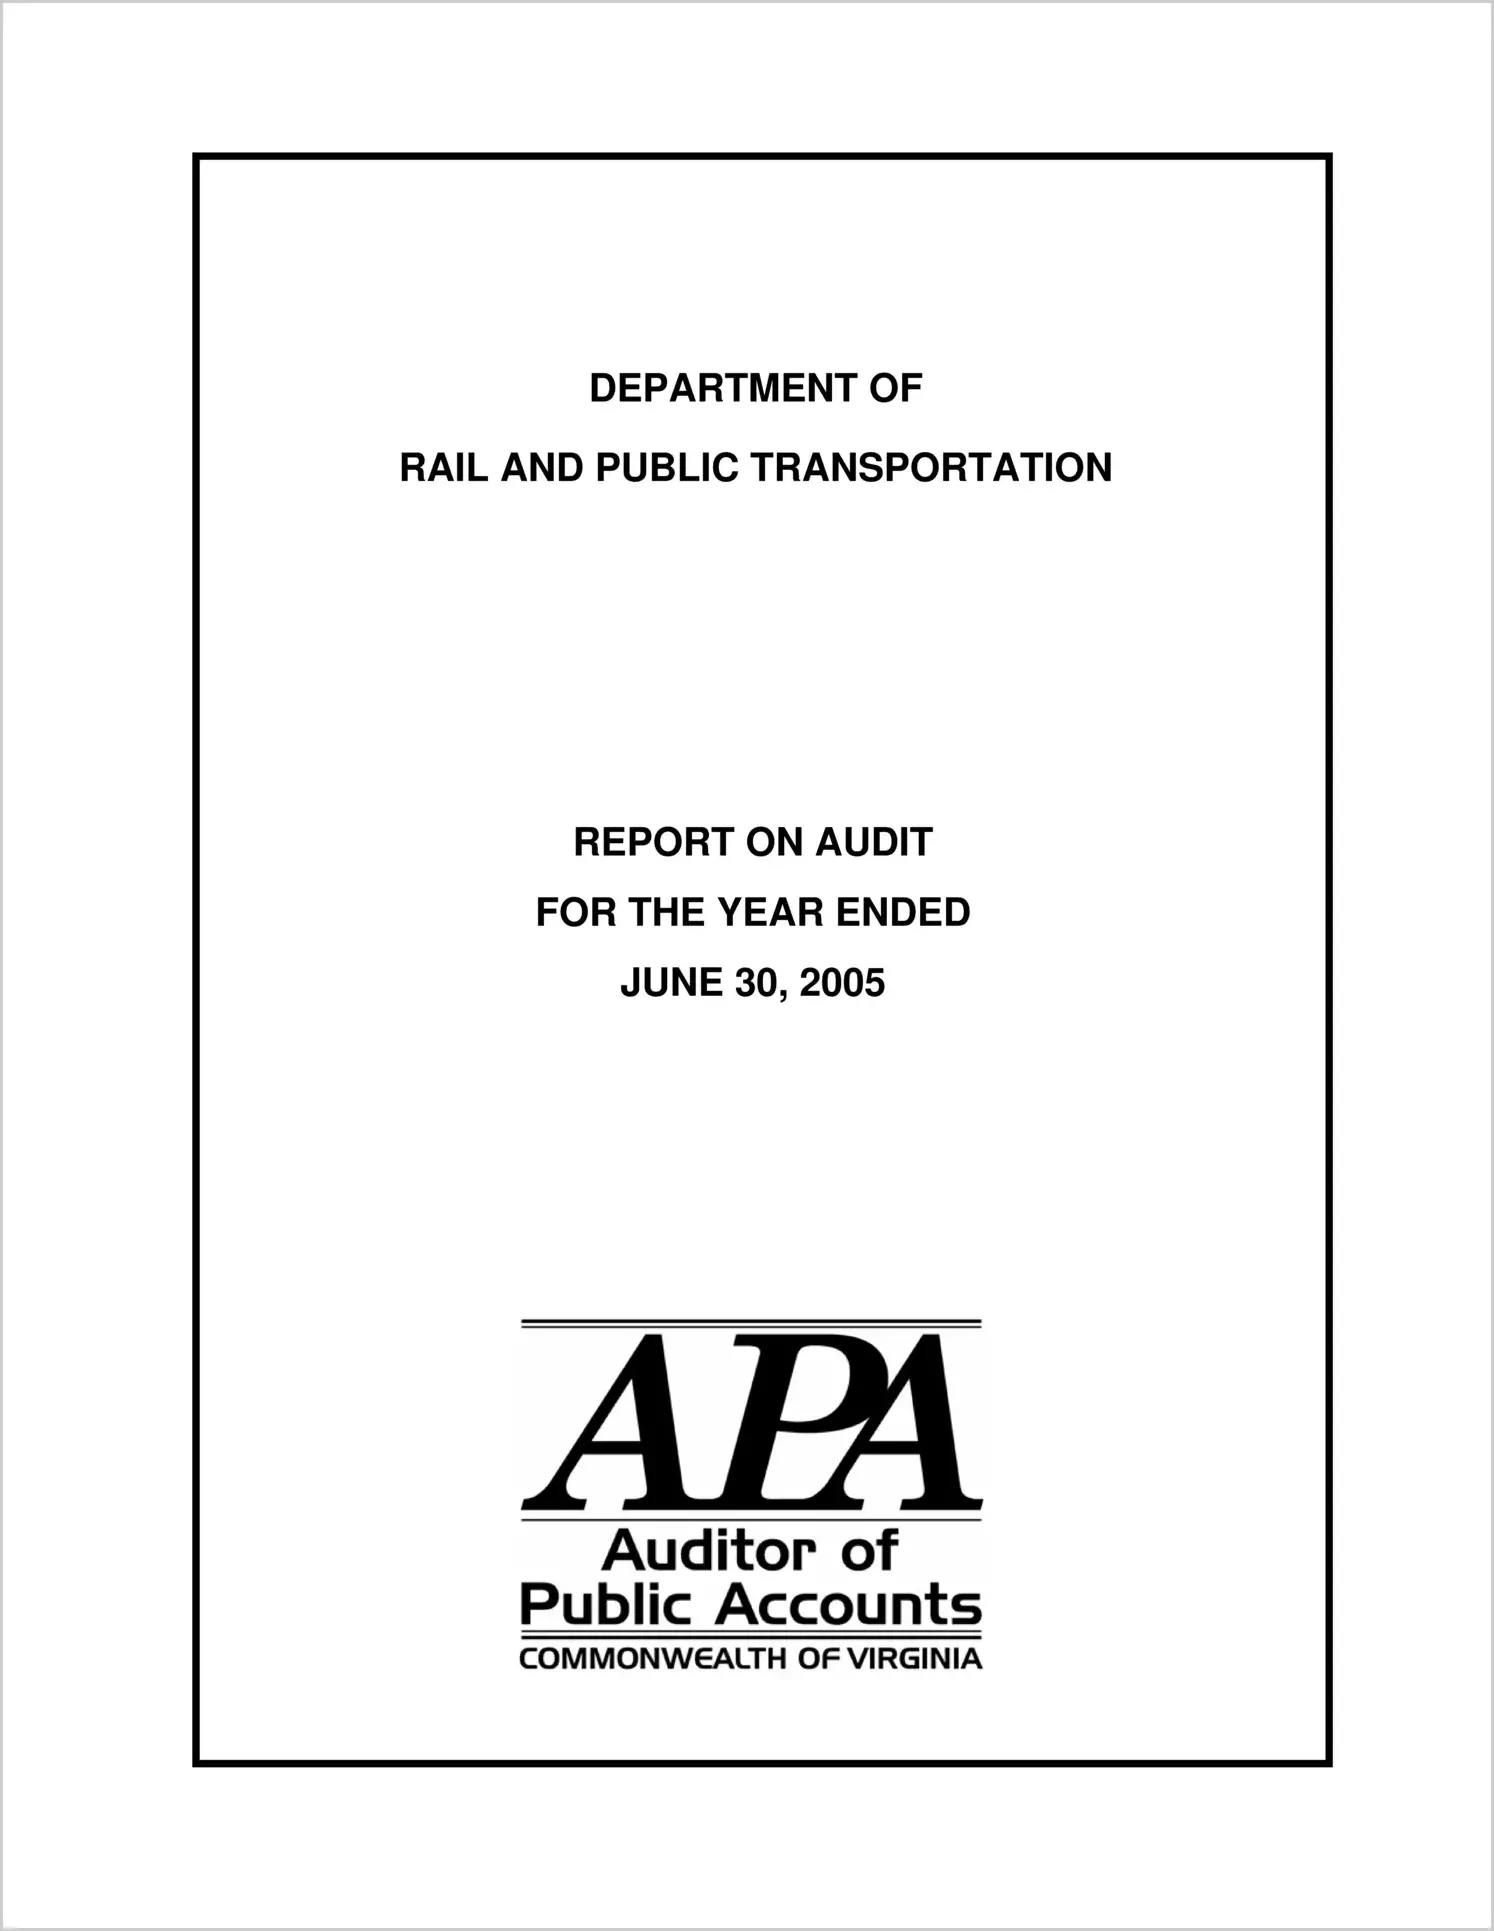 Department of Rail and Public Transportation for the year ended June 30, 2005